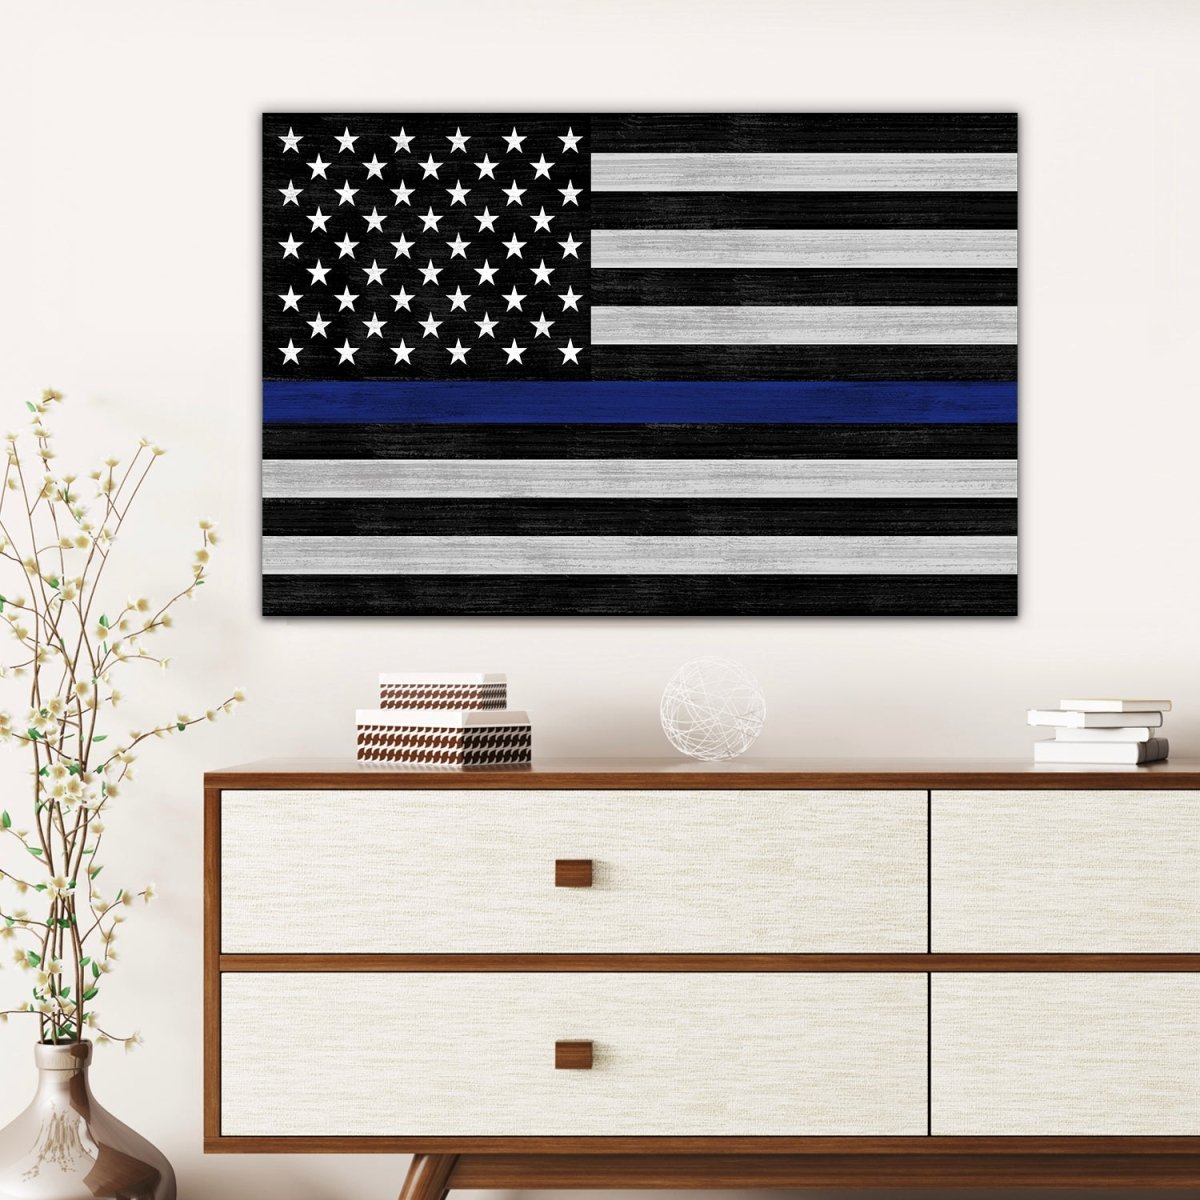 Blue Line Policer Officer Sign in Family Room - Pretty Perfect Studio